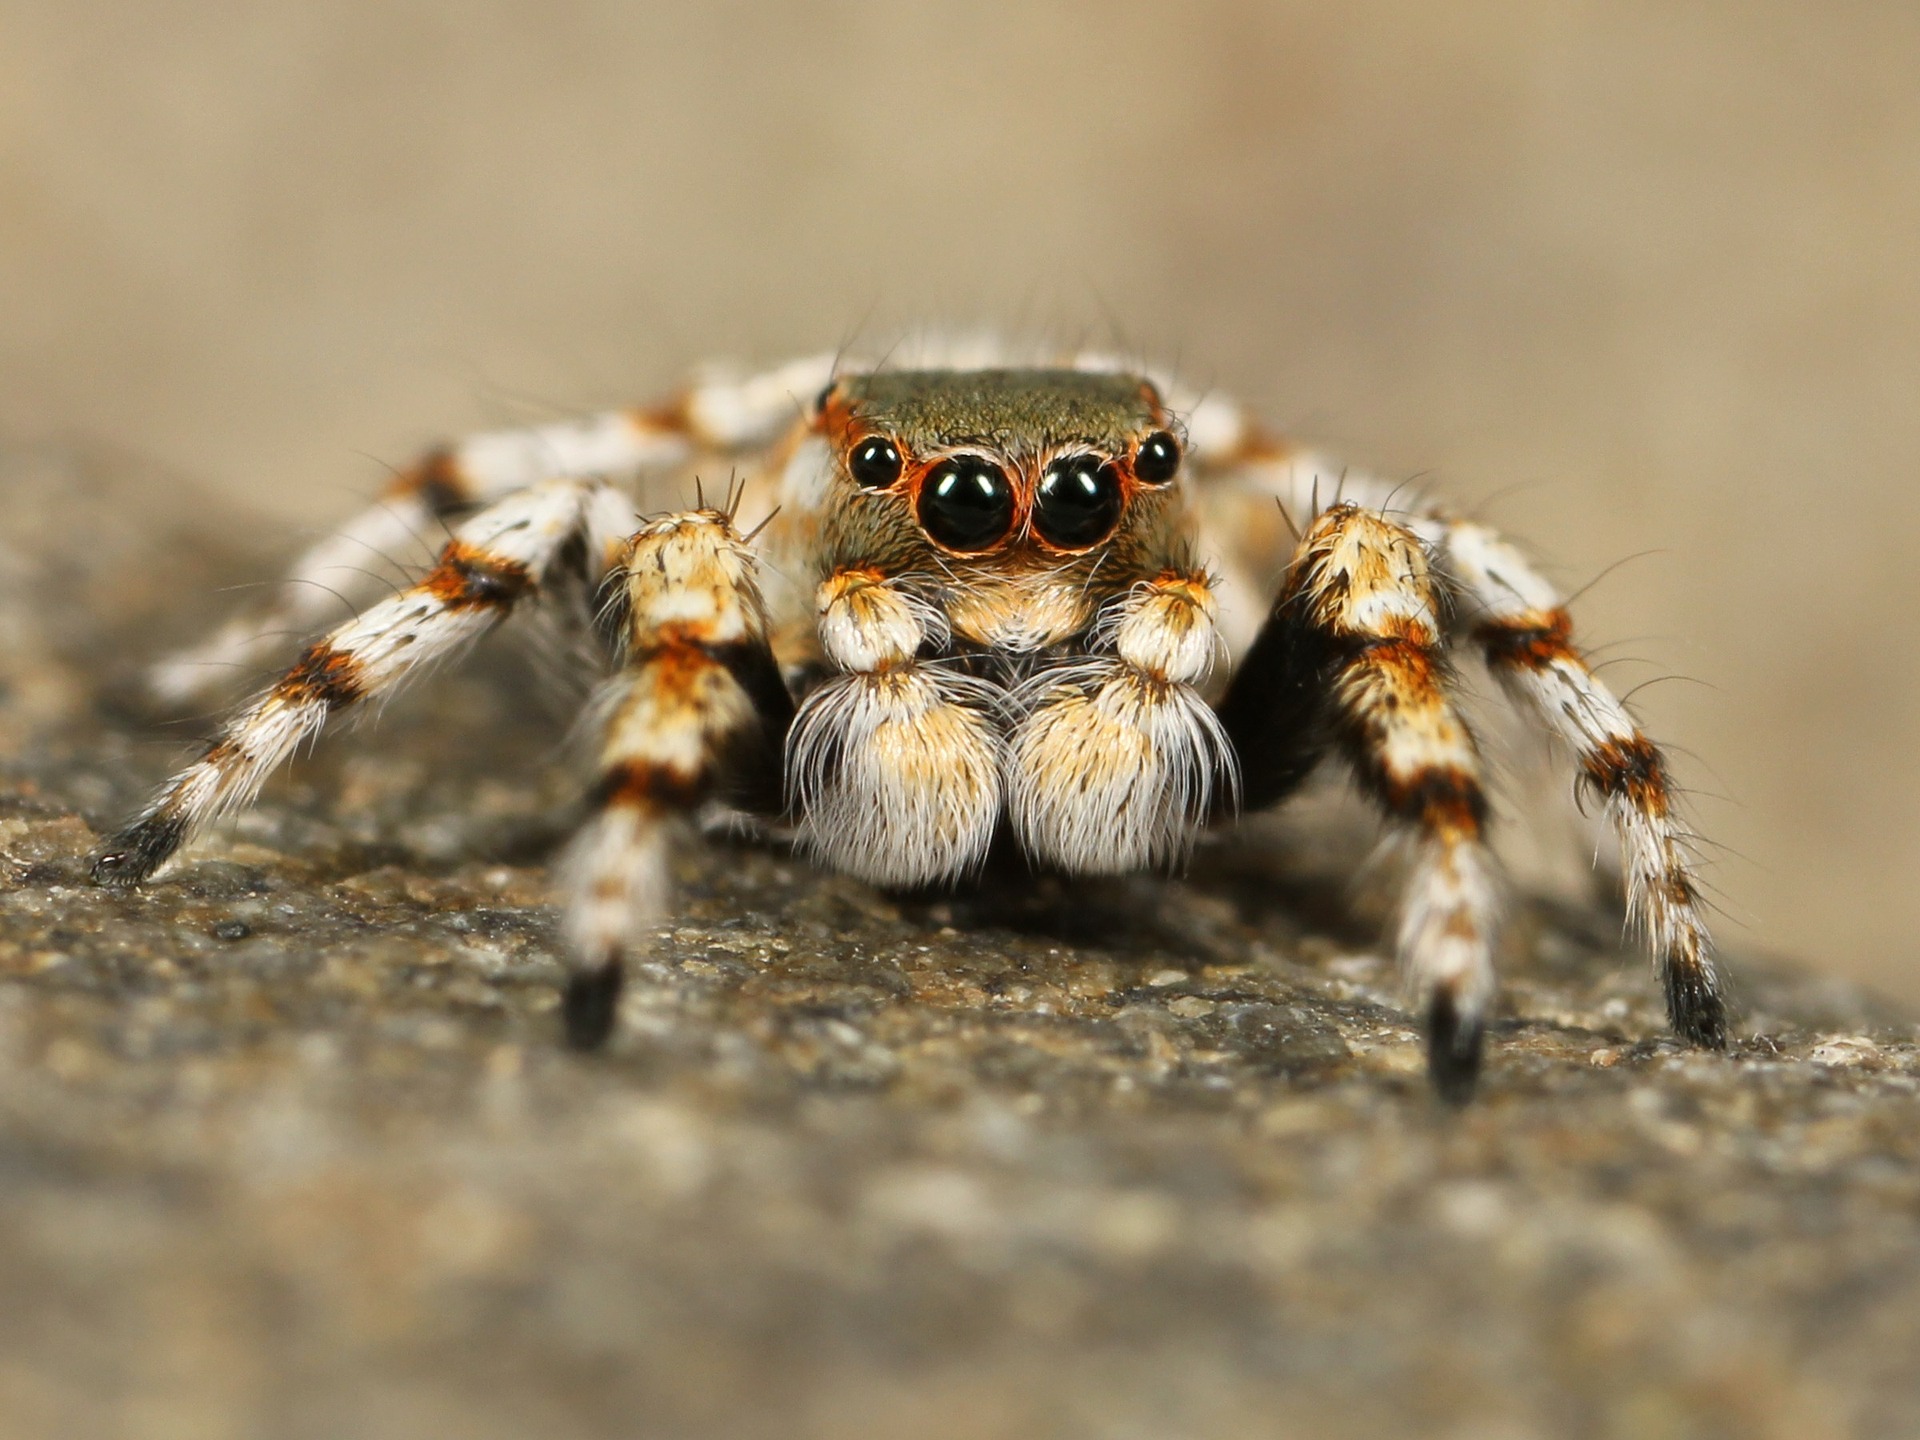 A Spider Spiritual Meaning: How Spiders are More Beautiful than Scary